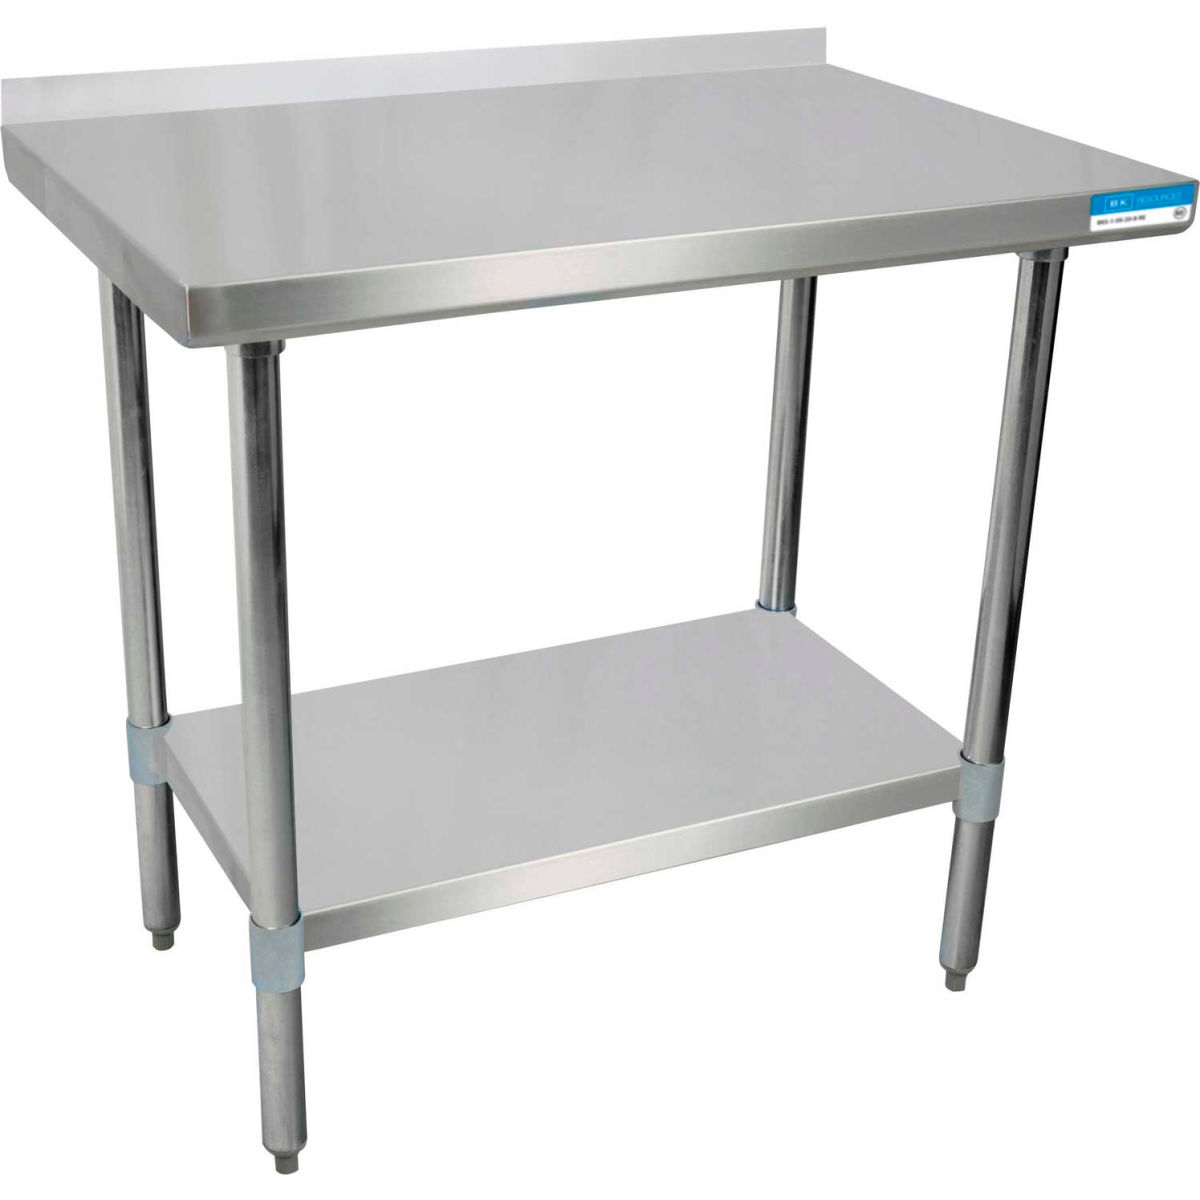 Picture of BK Resources B0899437 18 Gauge 430 Series Stainless Workbench with Undershelf & 1.5 in. Backsplash - 60 x 24 in.